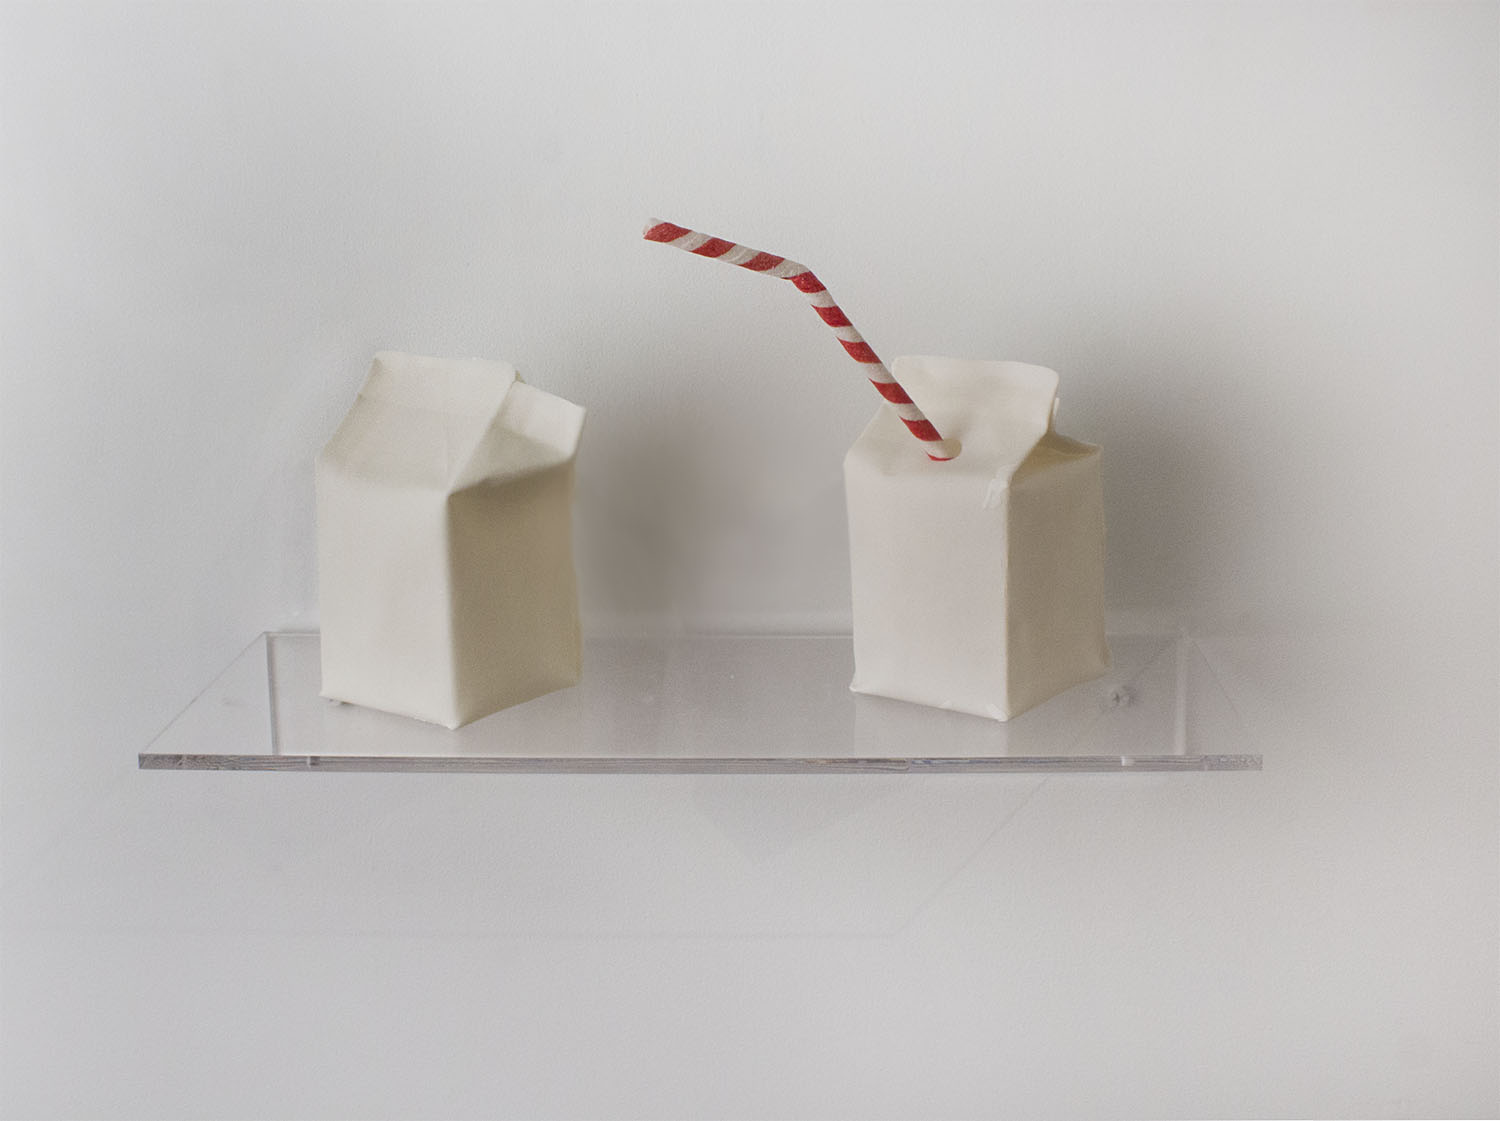 Milk Cartons, detail with straw